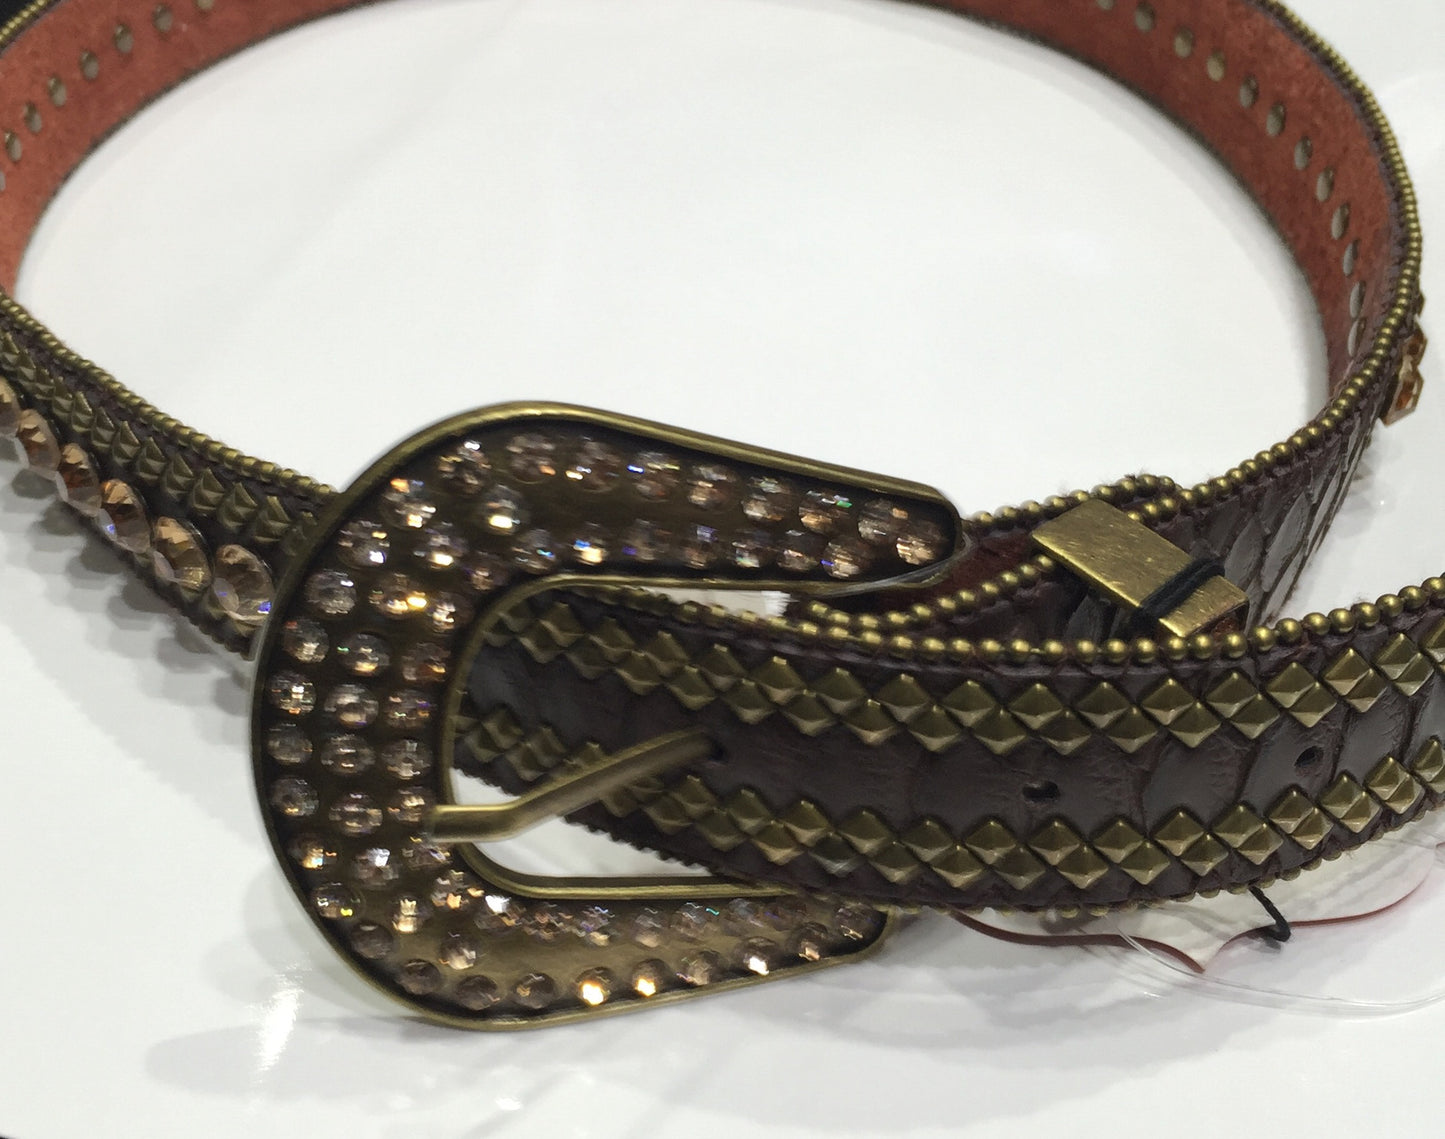 Belts-Wide Brown Leather with Large Round Bronze Crystal and Geometric Studs and Beading